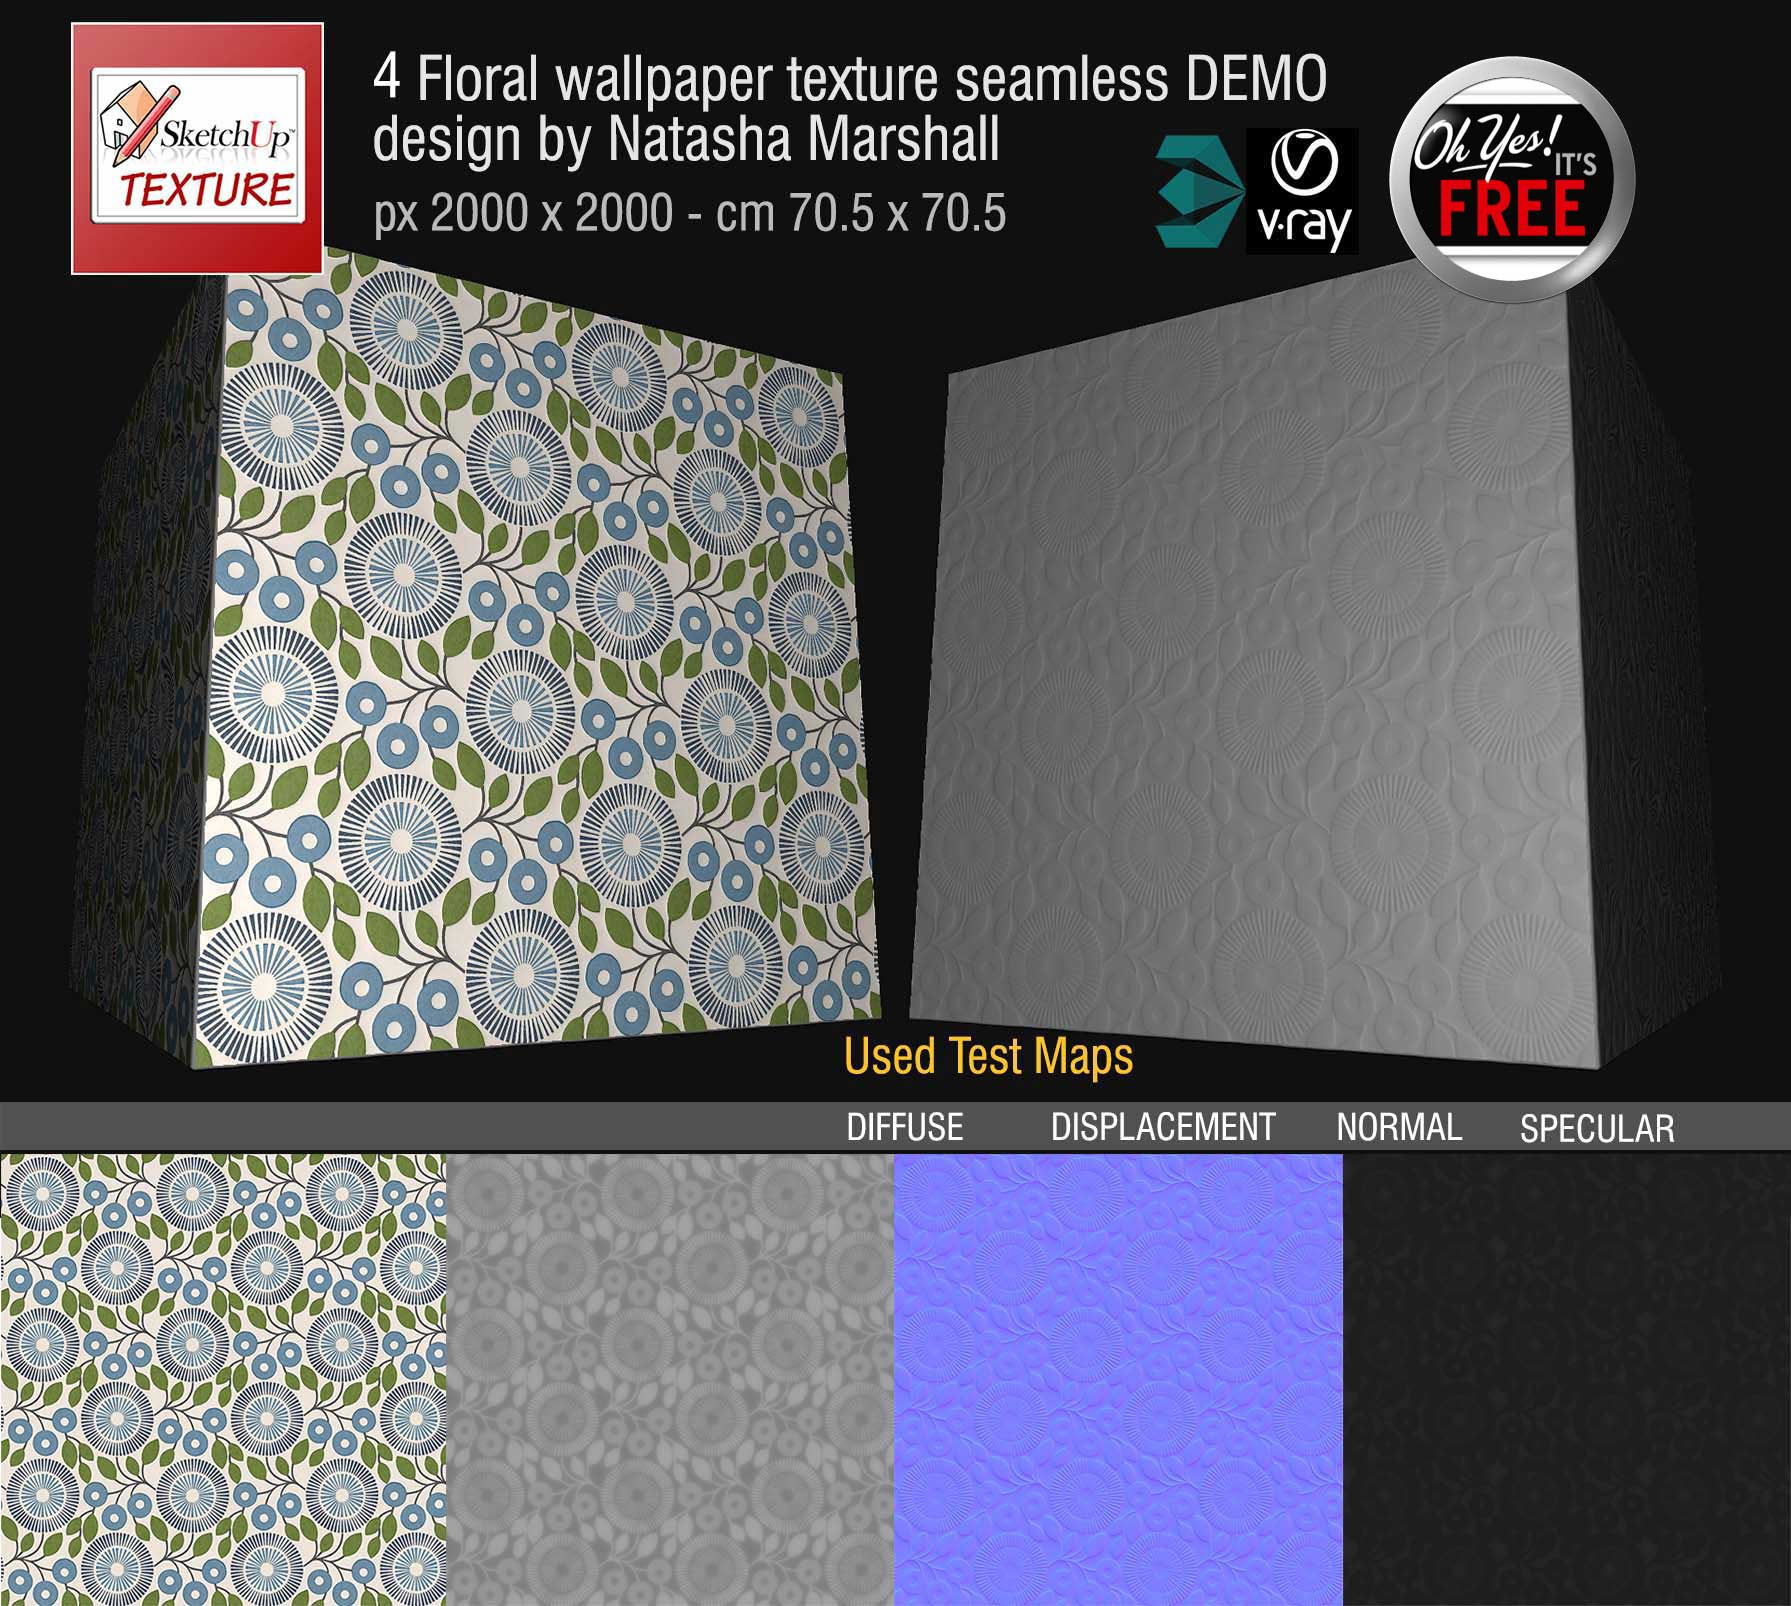 Preview Floral Wallpaper - fabric seamless texture 4 and maps